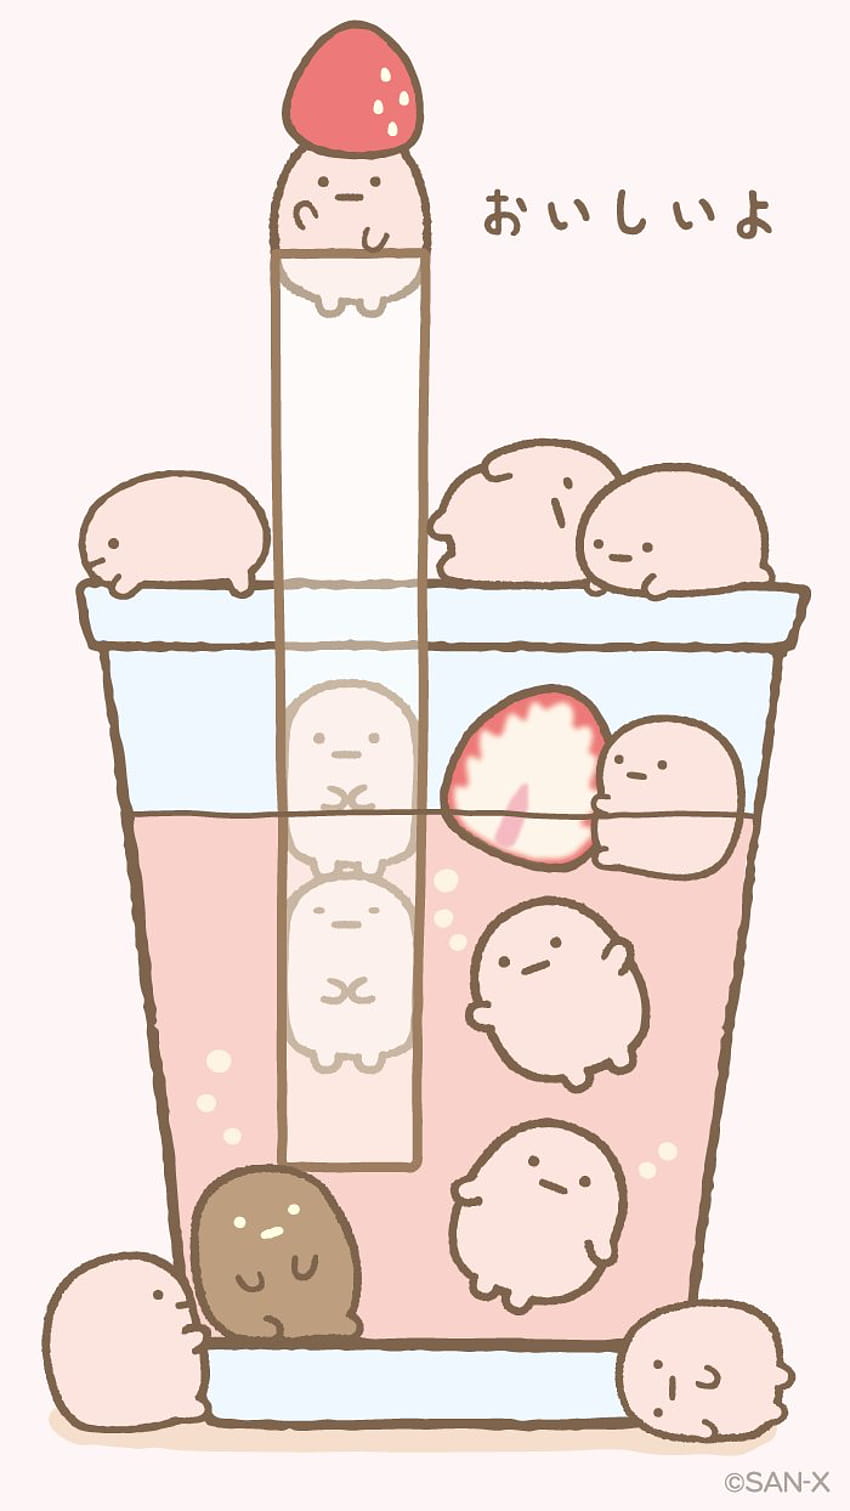 A glass of milk with strawberry and a cute character - Boba